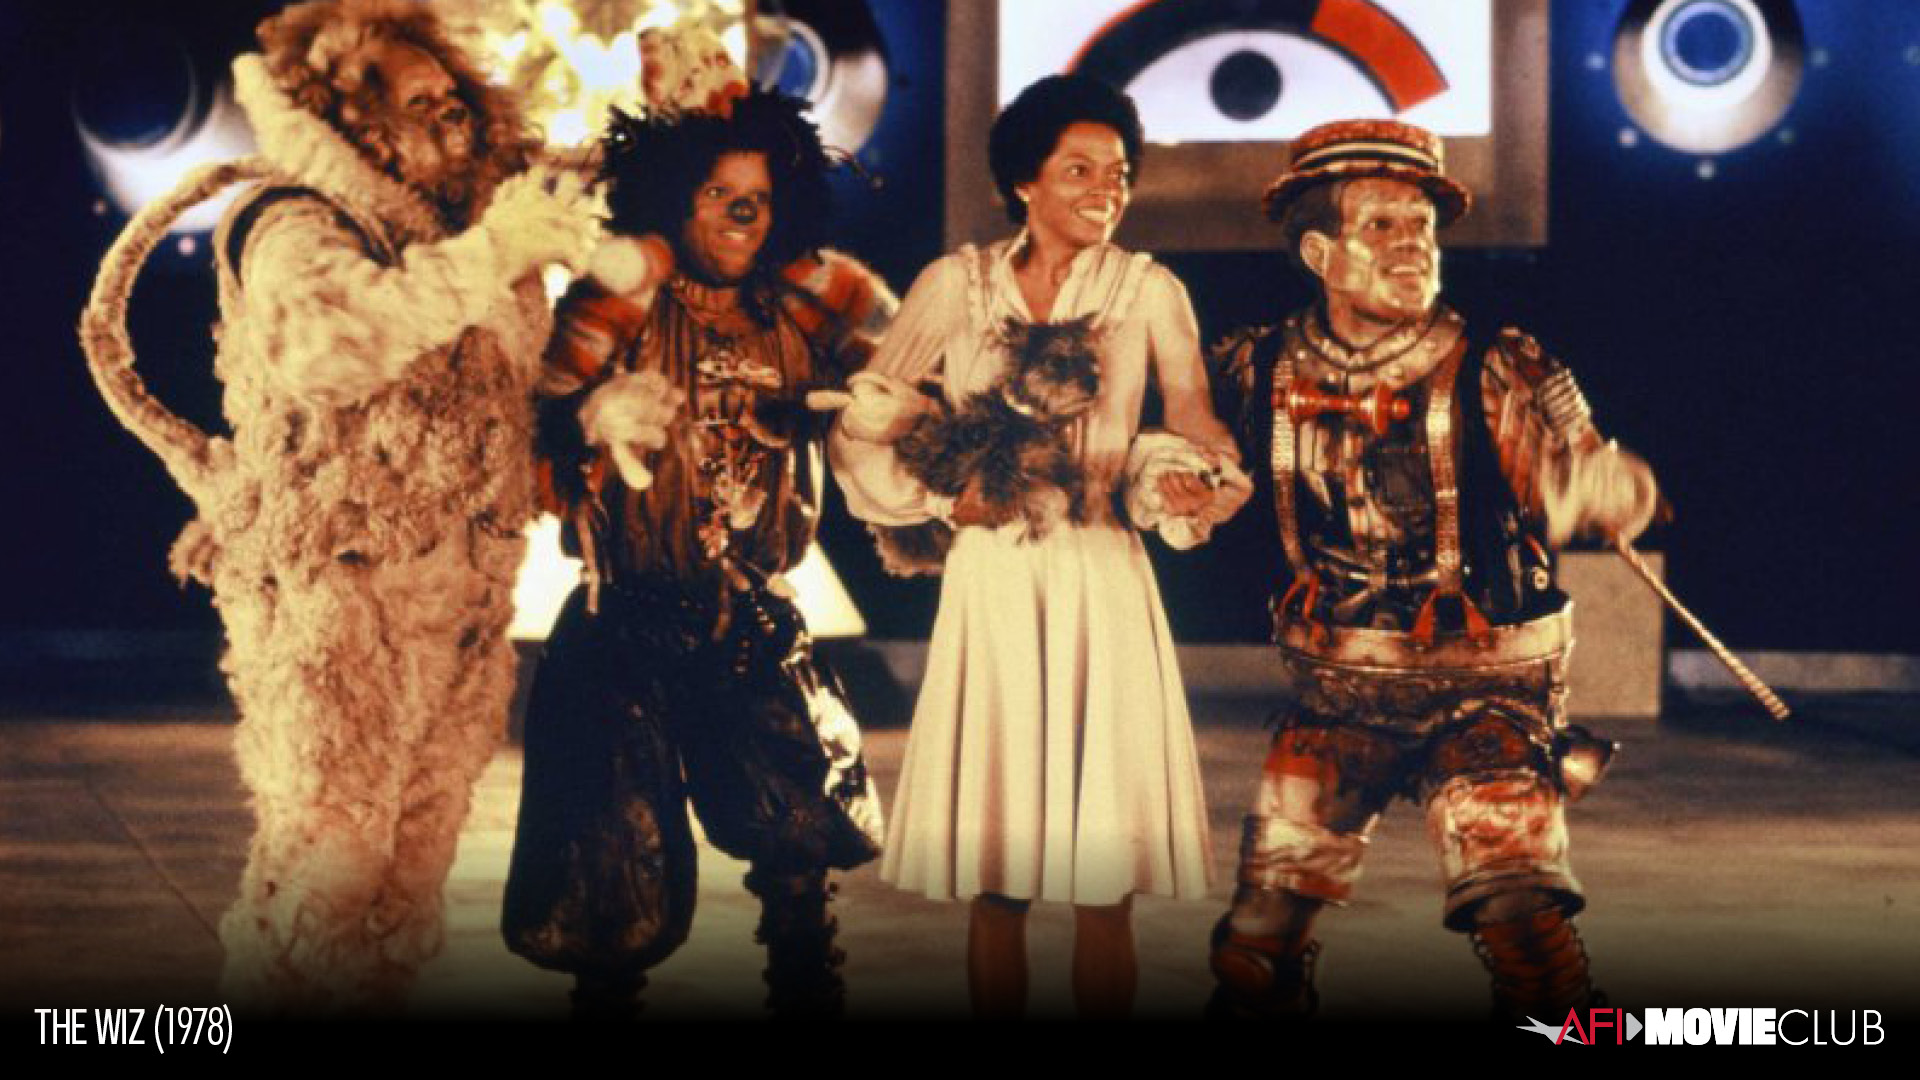 The Wiz Film Still - Michael Jackson, Diana Ross, Ted Ross, and Nipsey Russell